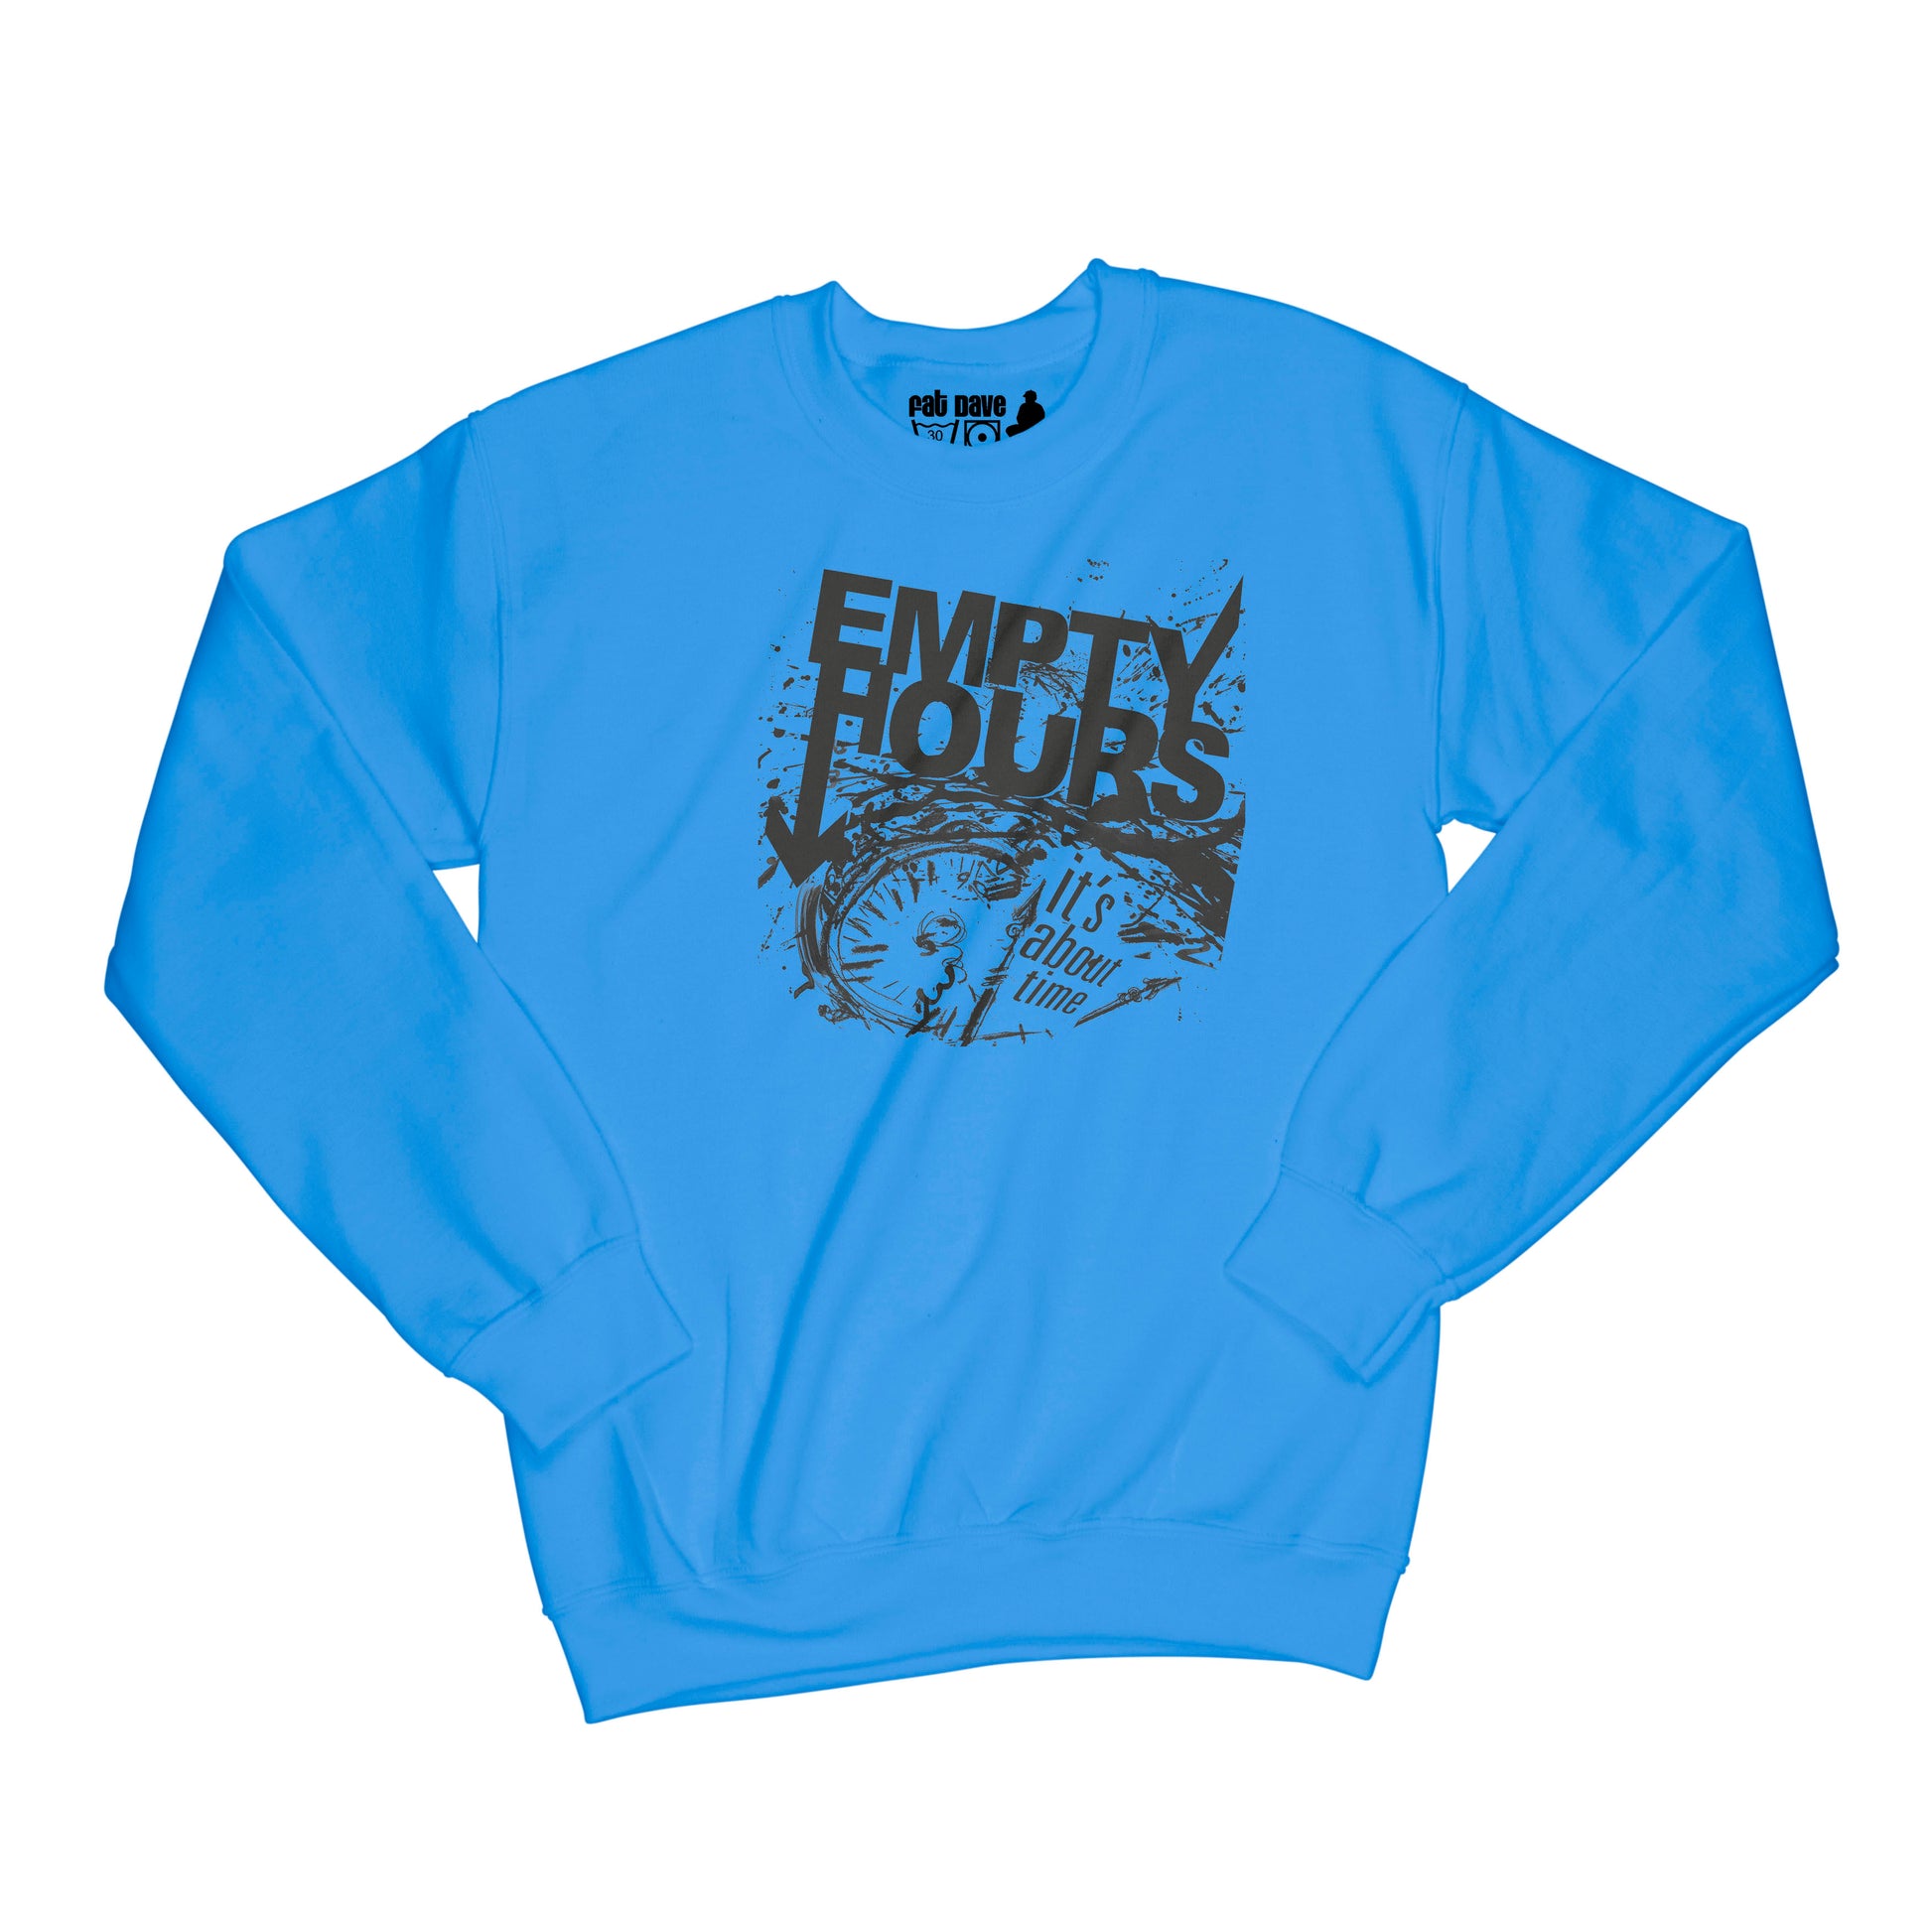 Brantford, Empty Hours, Fat Dave, It's About Time album cover, Musician, Sweatshirt, Heather Royal Blue/Black